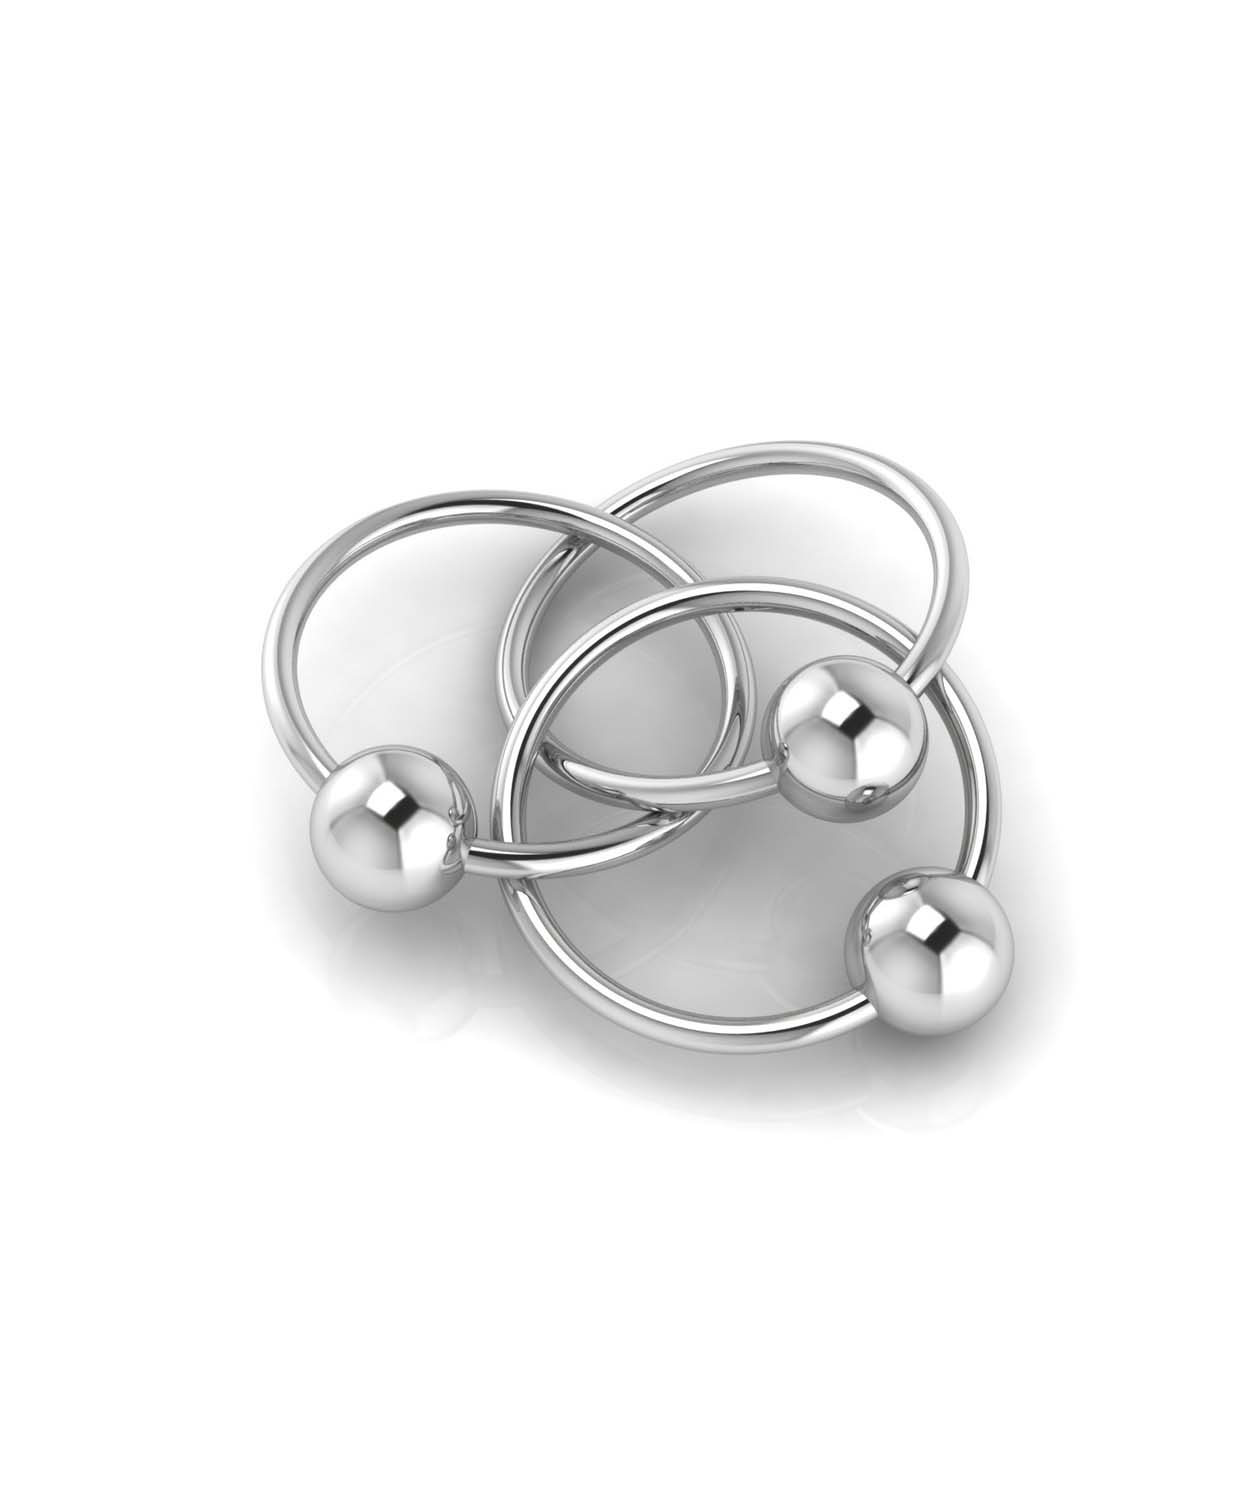 Sterling Silver Baby Rattle -Three Ring Baby Teether (35 gm)